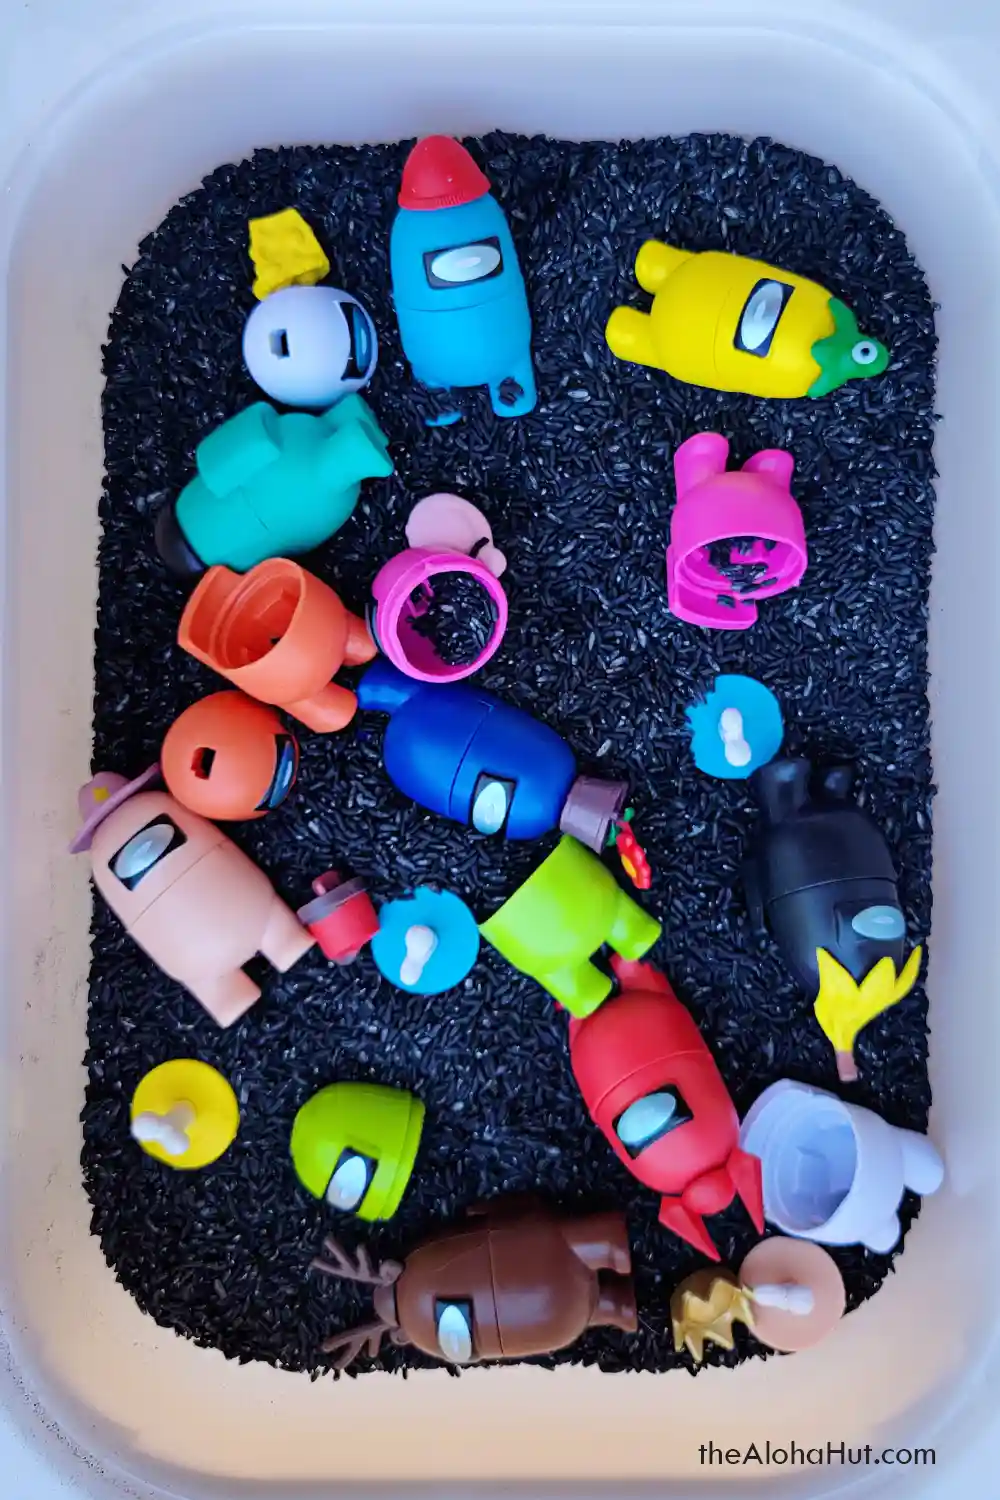 Among Us sensory table activity idea for kids, toddlers, and preschoolers. Download the printable I Spy Among Us game and instructions for an easy and fun kids sensory activity!